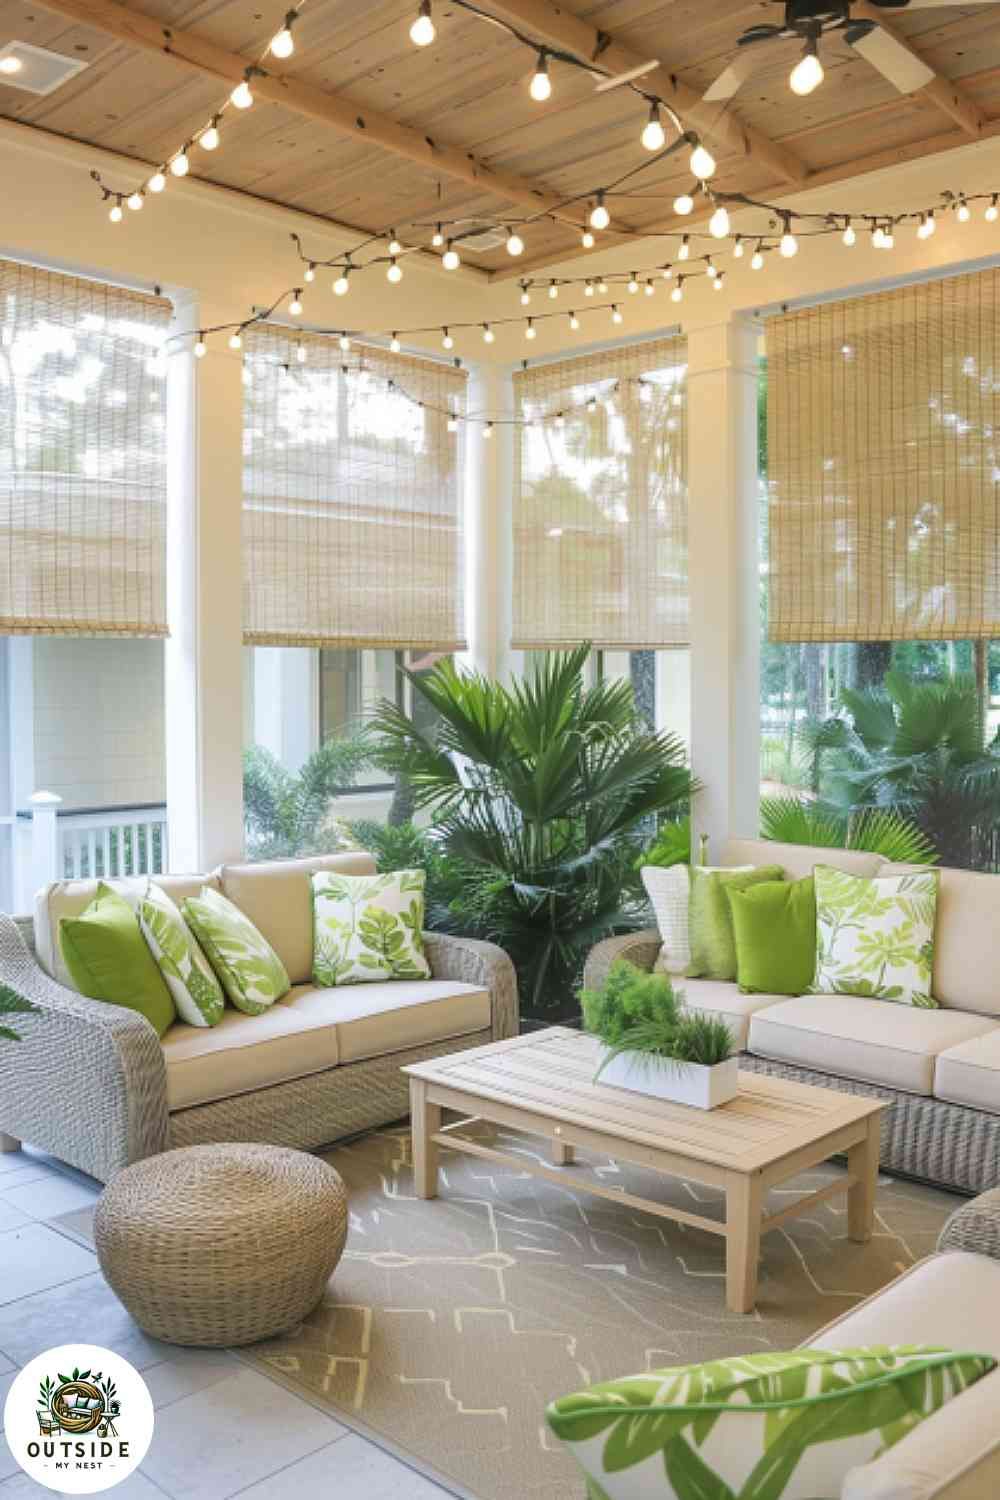 A Tranquil Retreat: The Allure of a Cozy Screened-In Porch